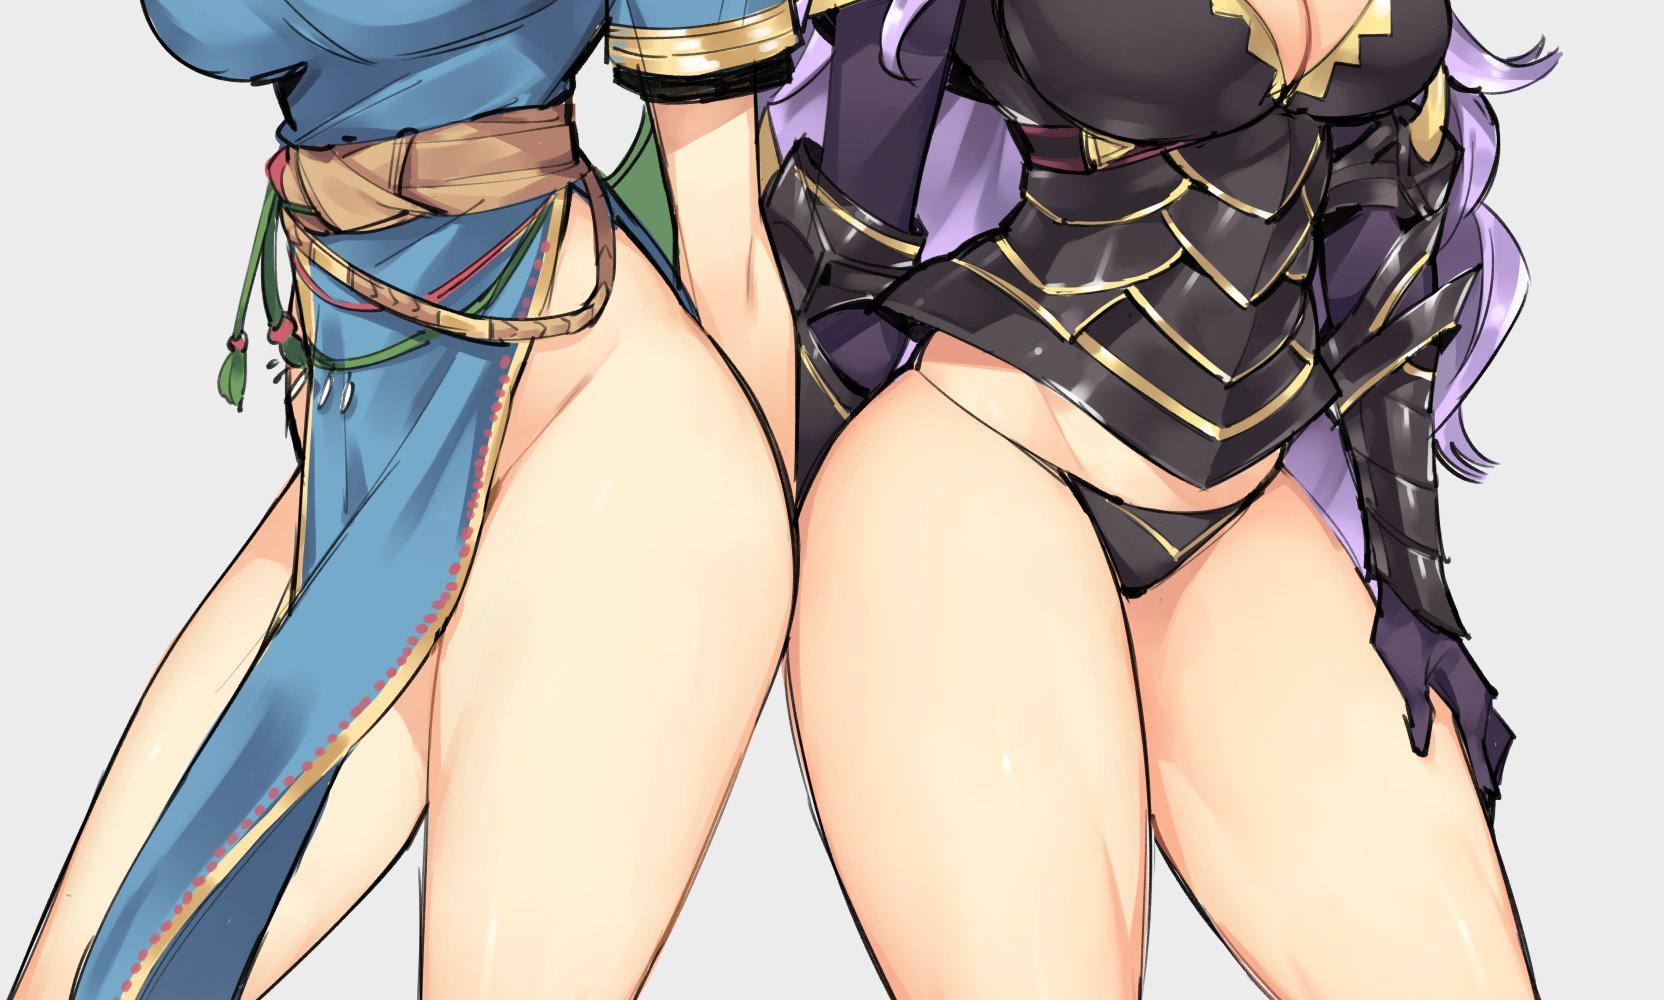 Lyn's and Camilla's thighs. (ge-b/MightyKow)